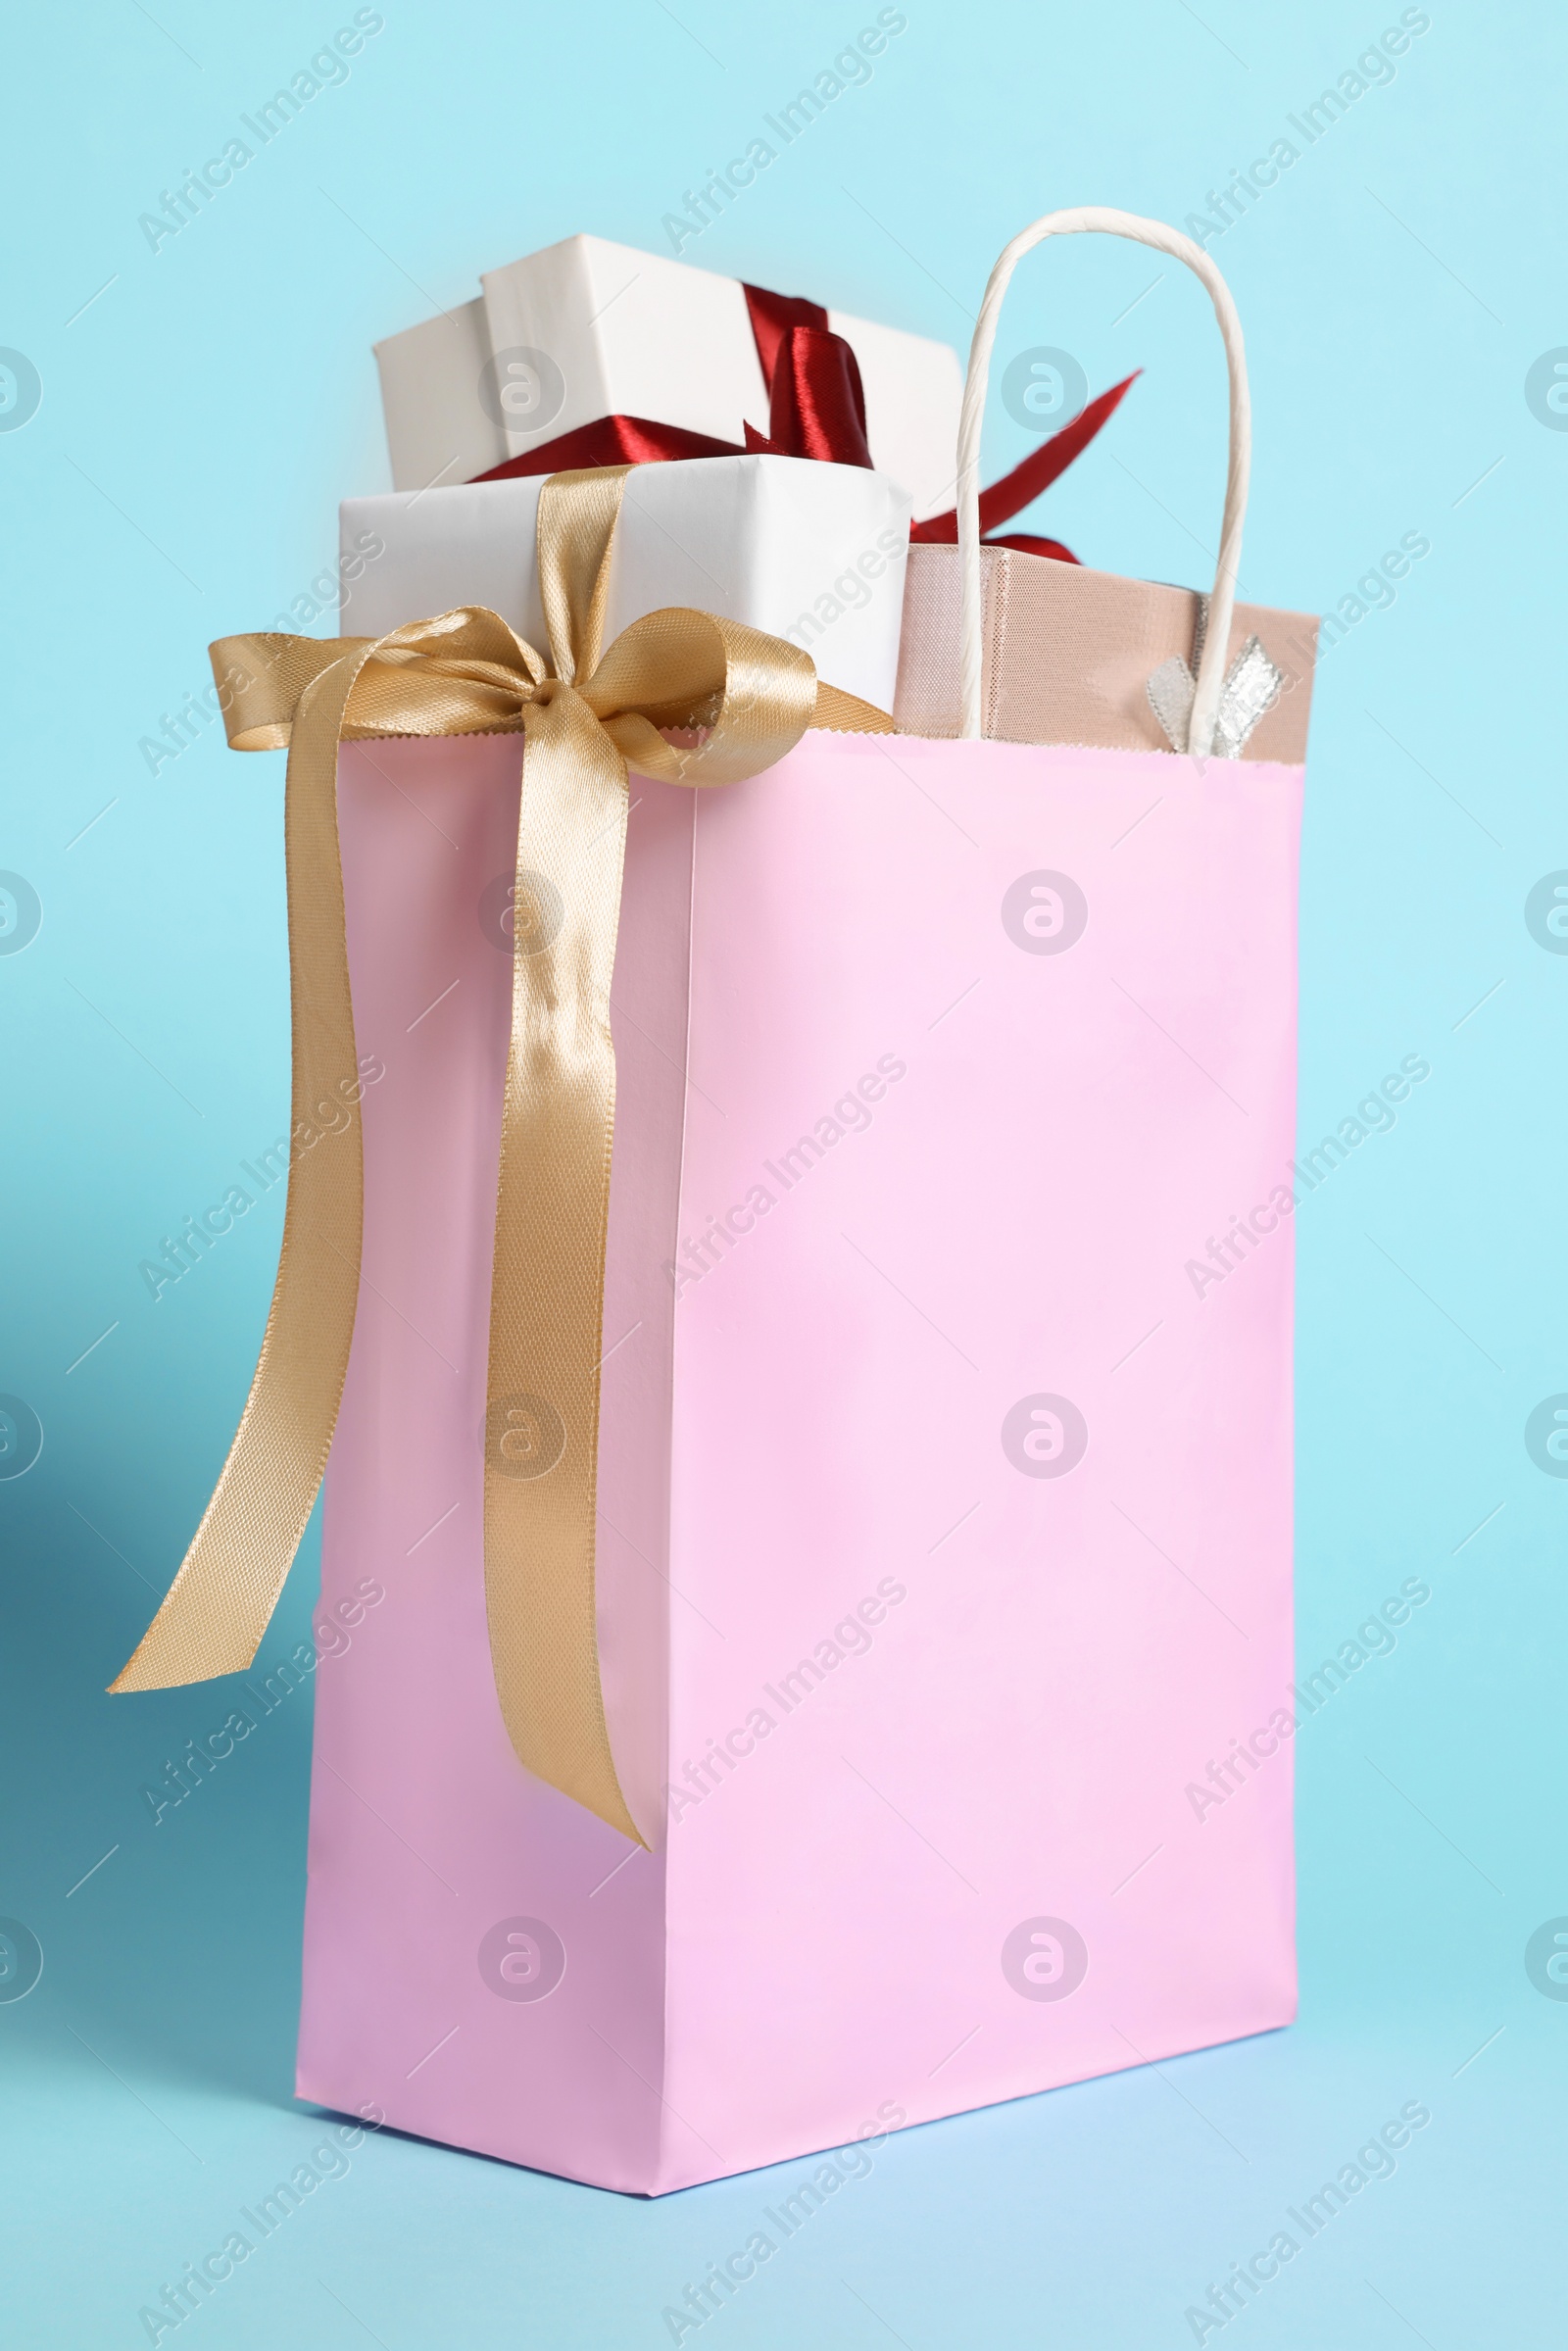 Photo of Pink paper shopping bag full of gift boxes on light blue background